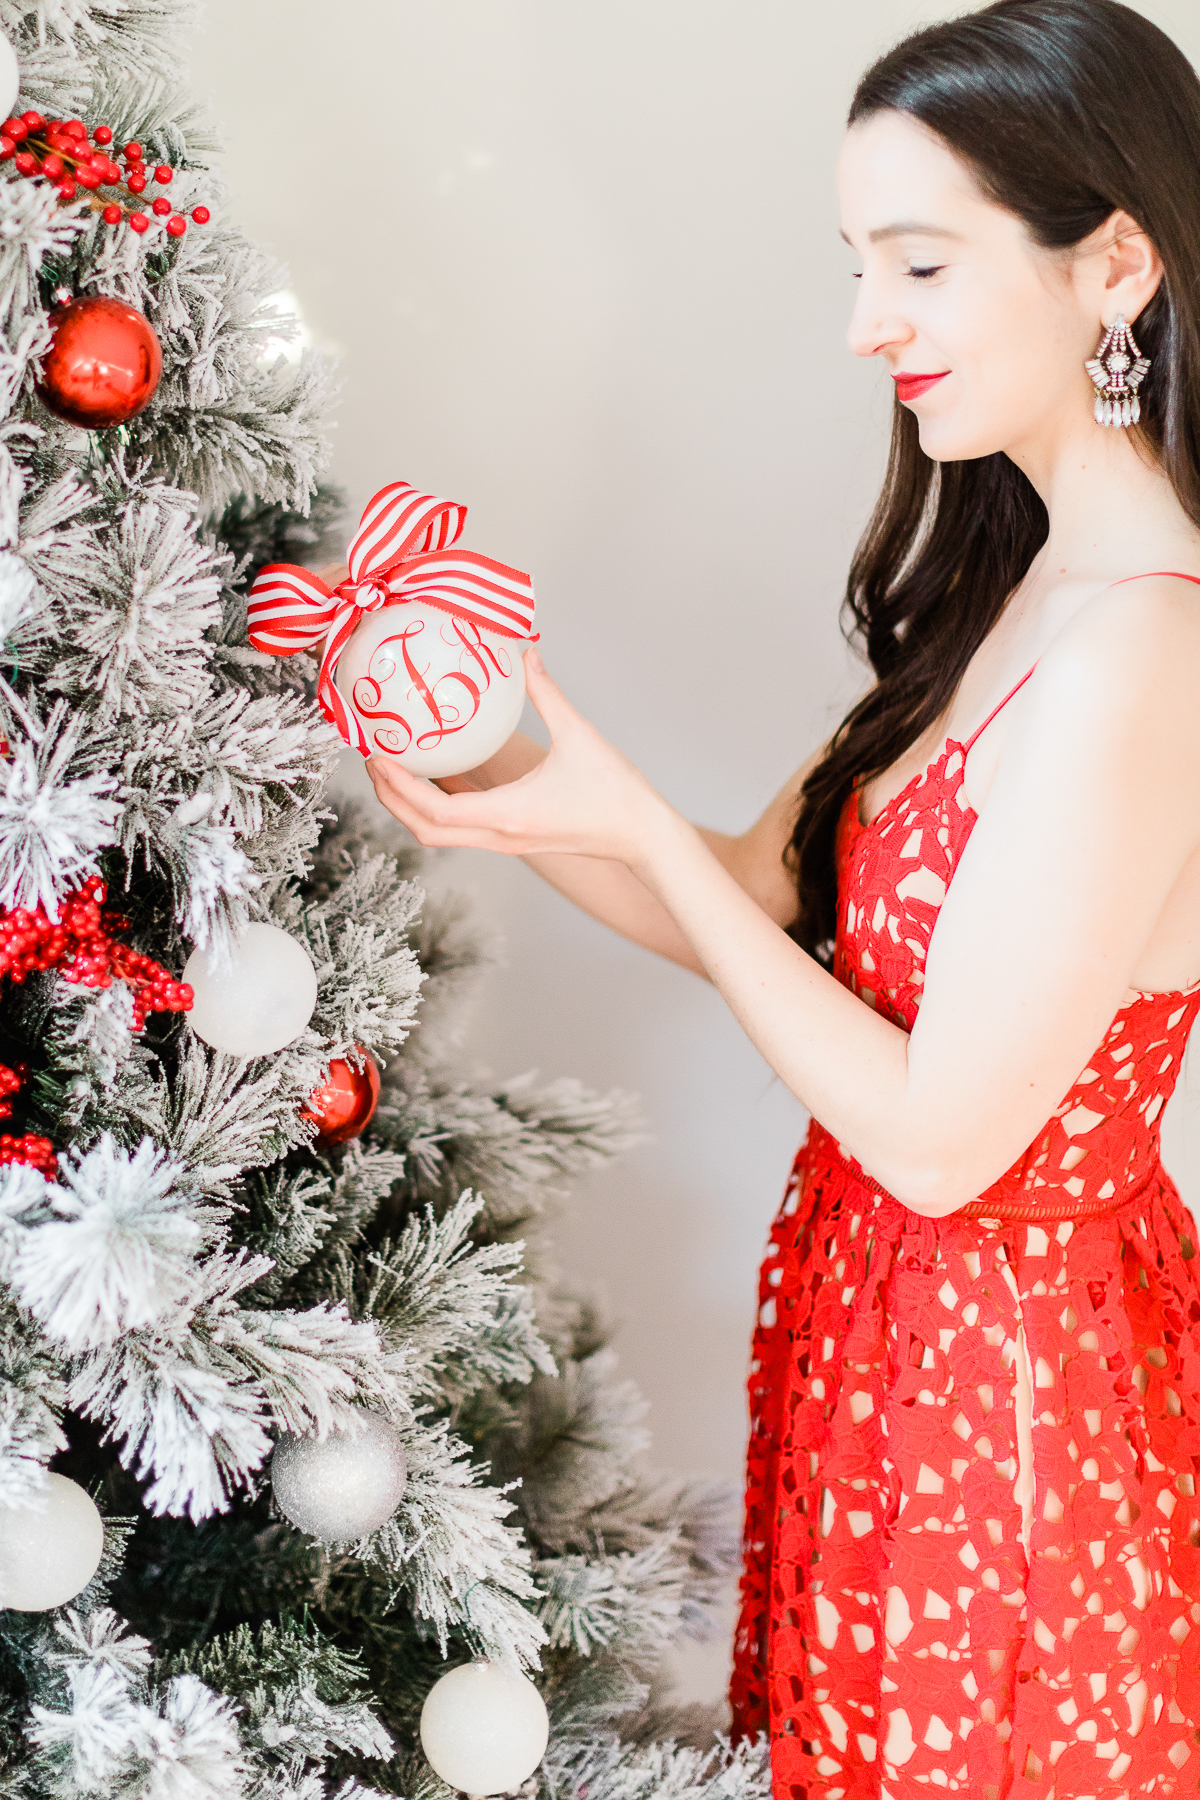 DIY personalized Christmas ornaments tutorial by southern blogger Stephanie Ziajka on Diary of a Debutante